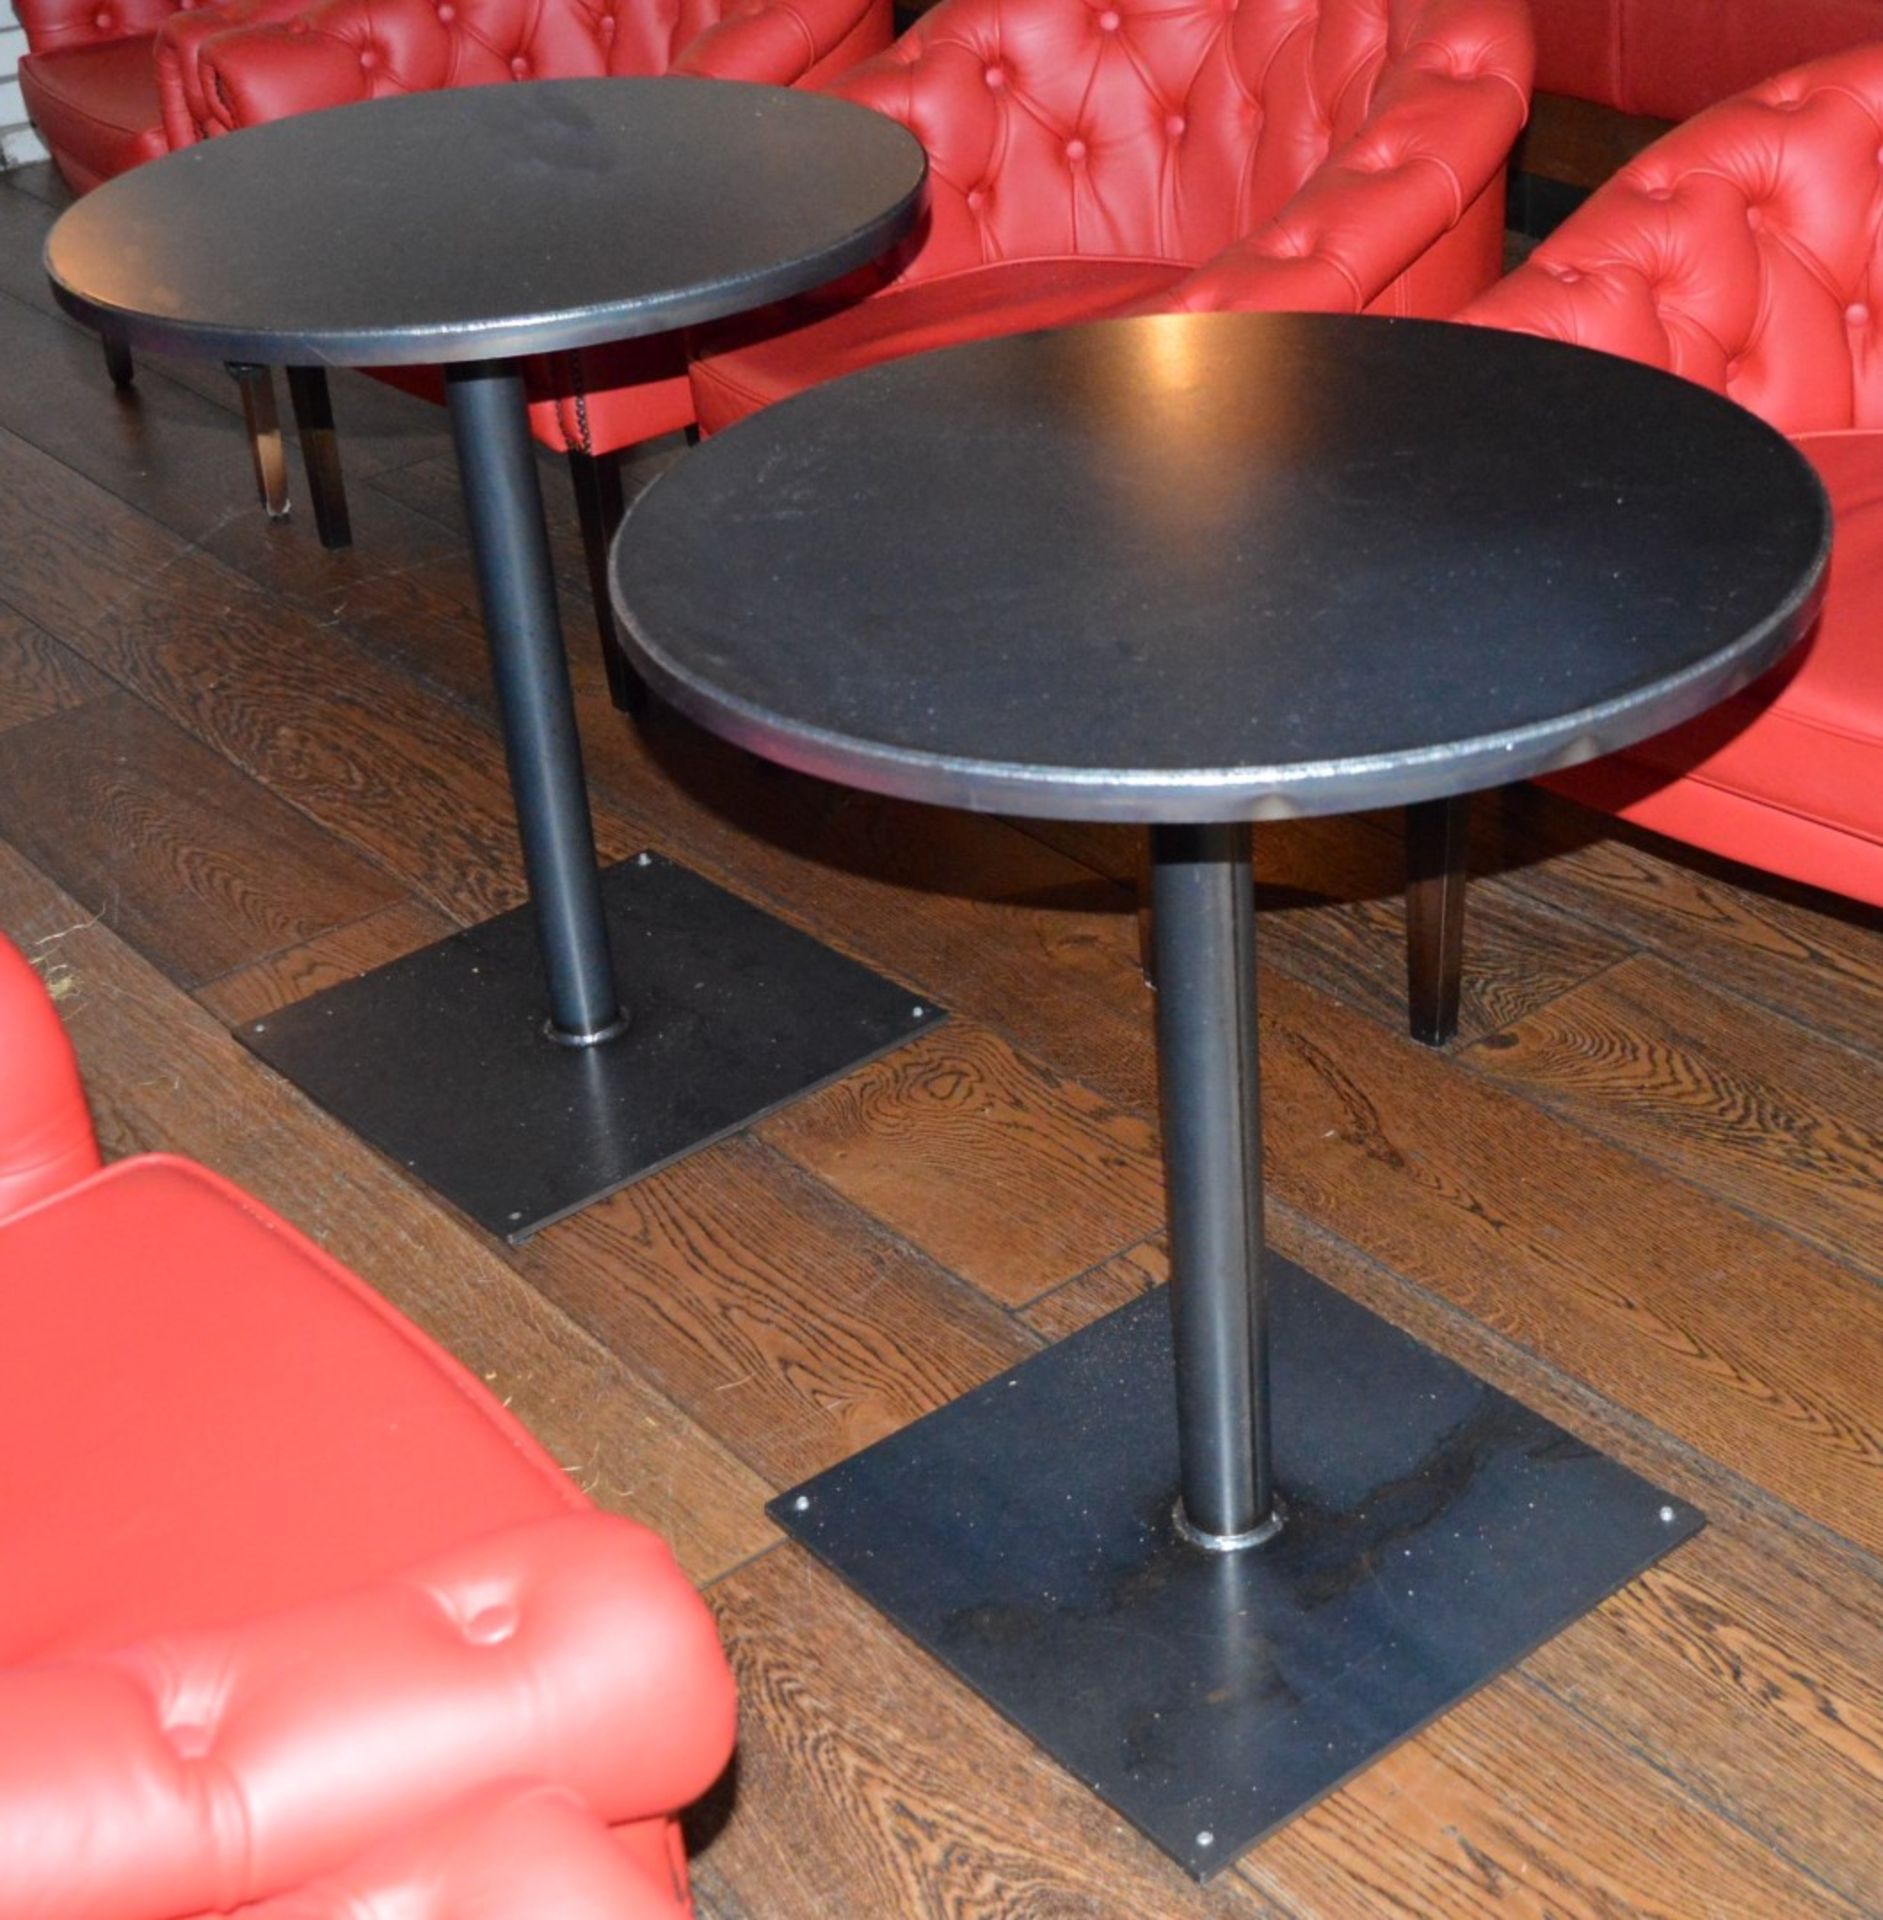 3 x Bistro Drinks Tables - Compact Heavy Tables With Square Bases and Circular Tops - Height